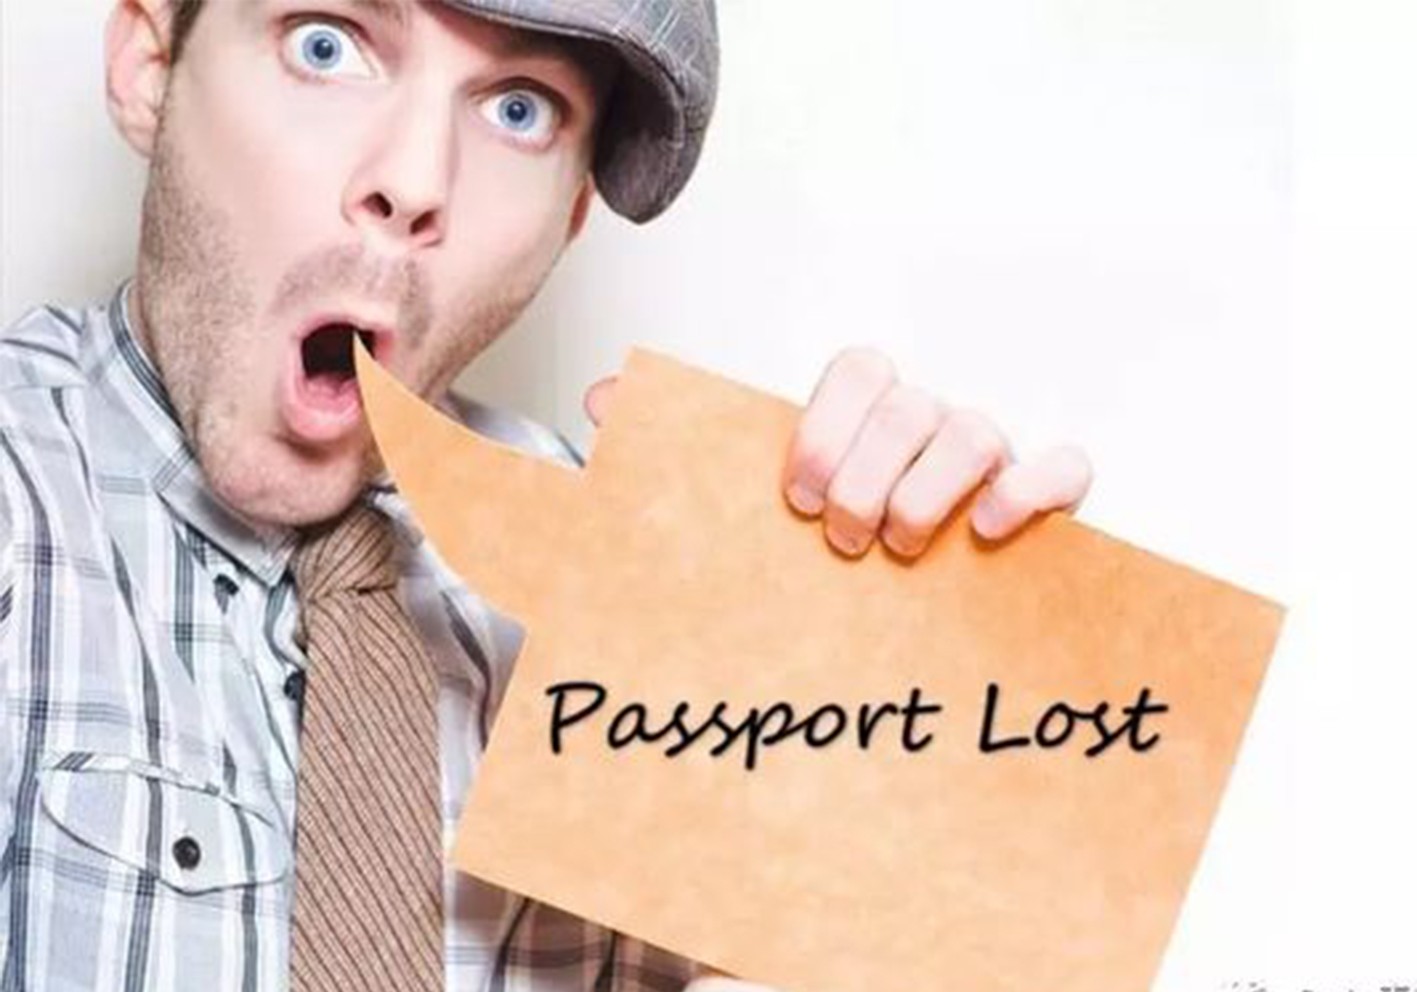 Instructions for Reporting Lost of Passport